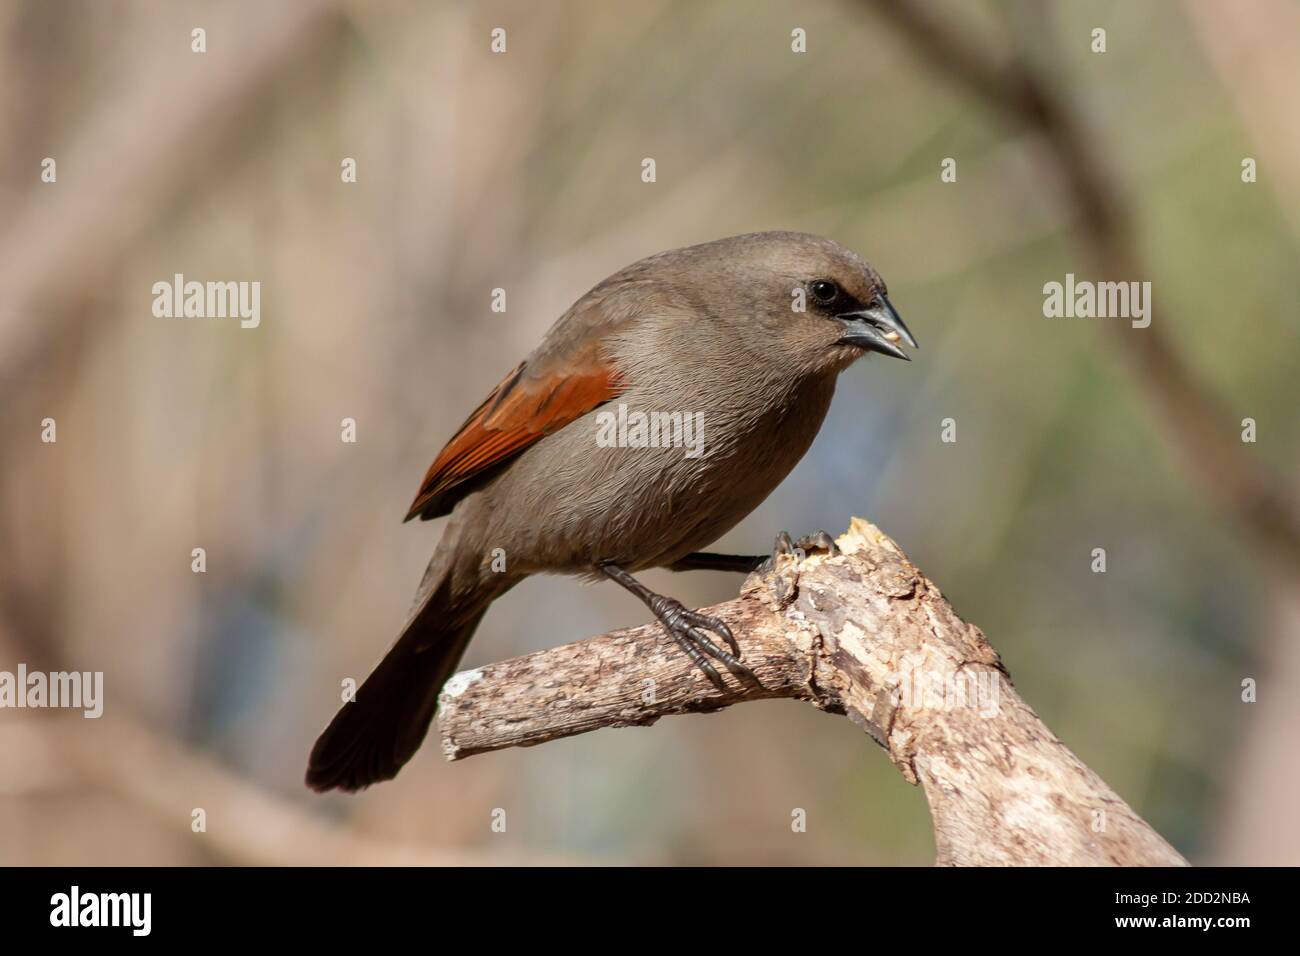 Bay-winged cowbird, Molothrus badius, perched on a branch. Typical bird of Argentina Stock Photo